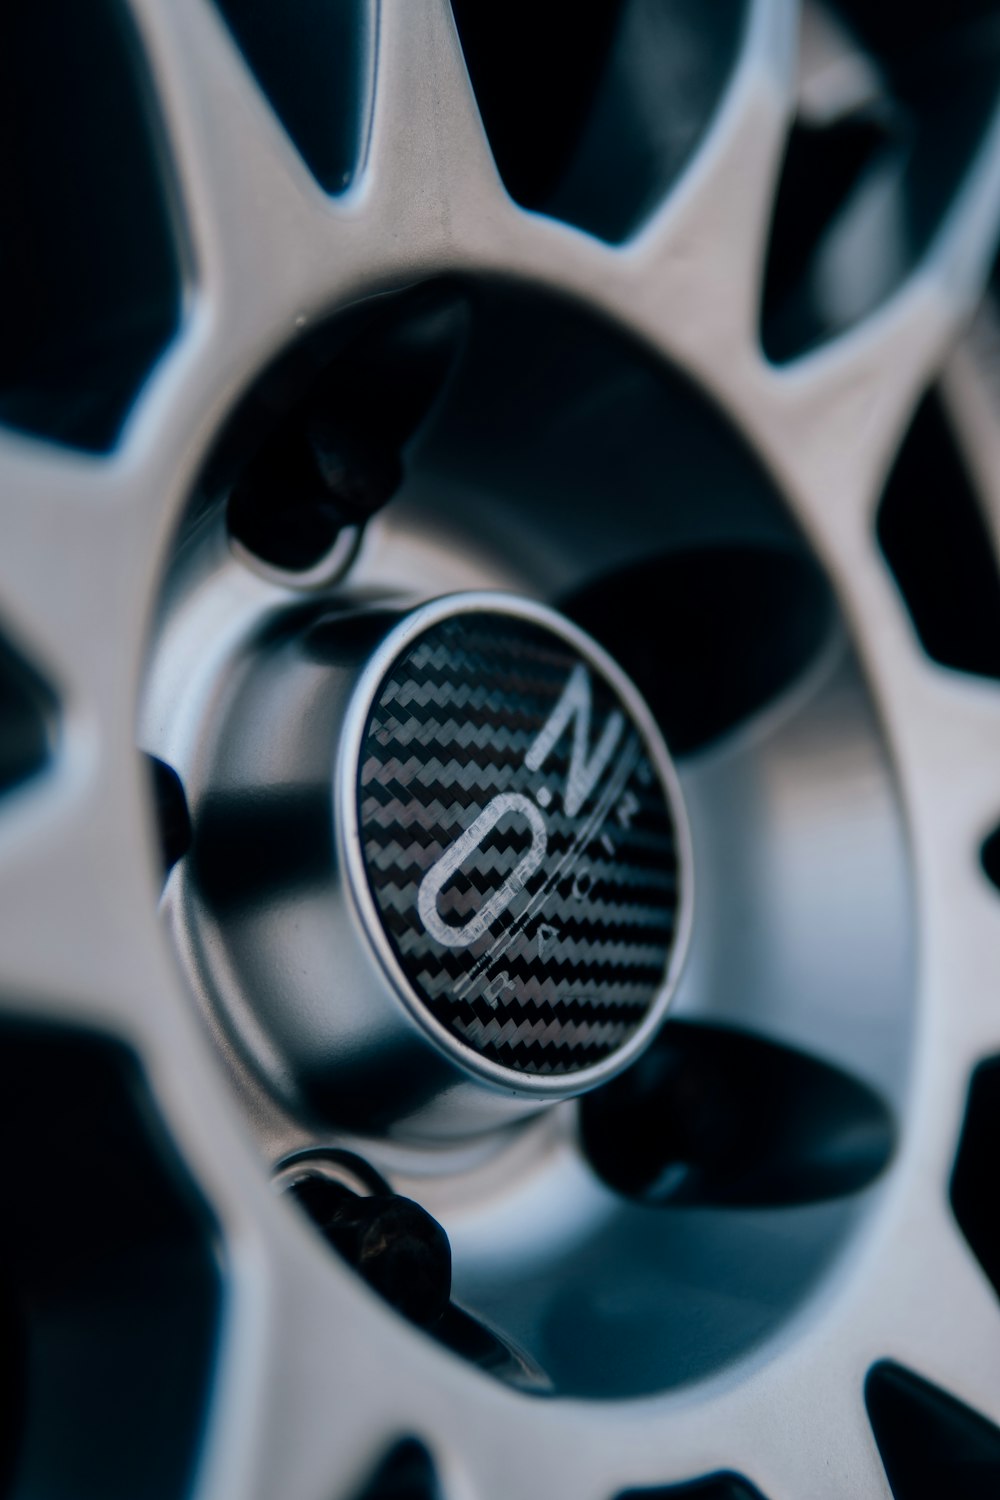 a close up of a wheel with a logo on it